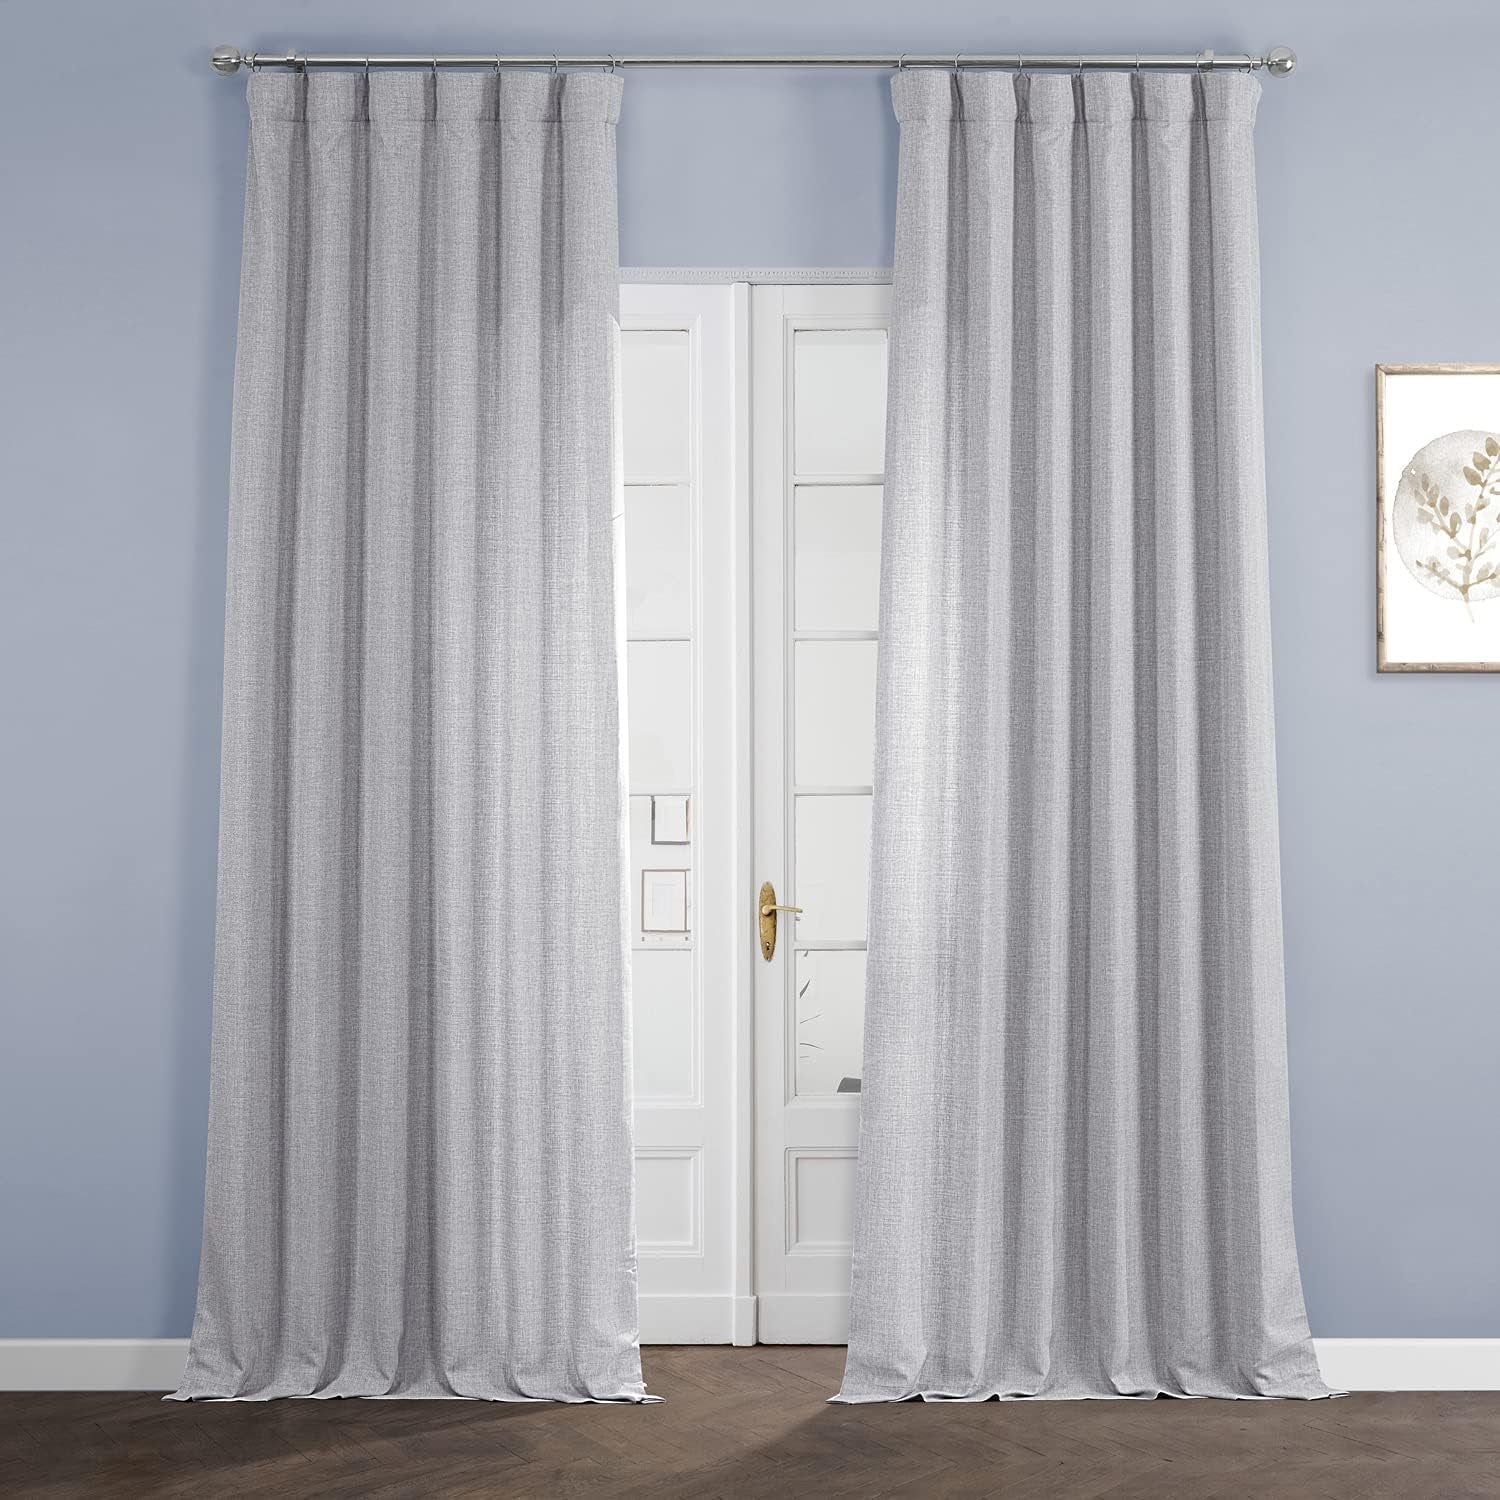 HPD HALF PRICE DRAPES Italian Linen Curtains for Bedroom & Living Room 84 Inches Long Room Darkening Curtains (1 Panel), 50W X 84L, Magnolia off White  Exclusive Fabrics & Furnishings Portrait Grey 50W X 84L 